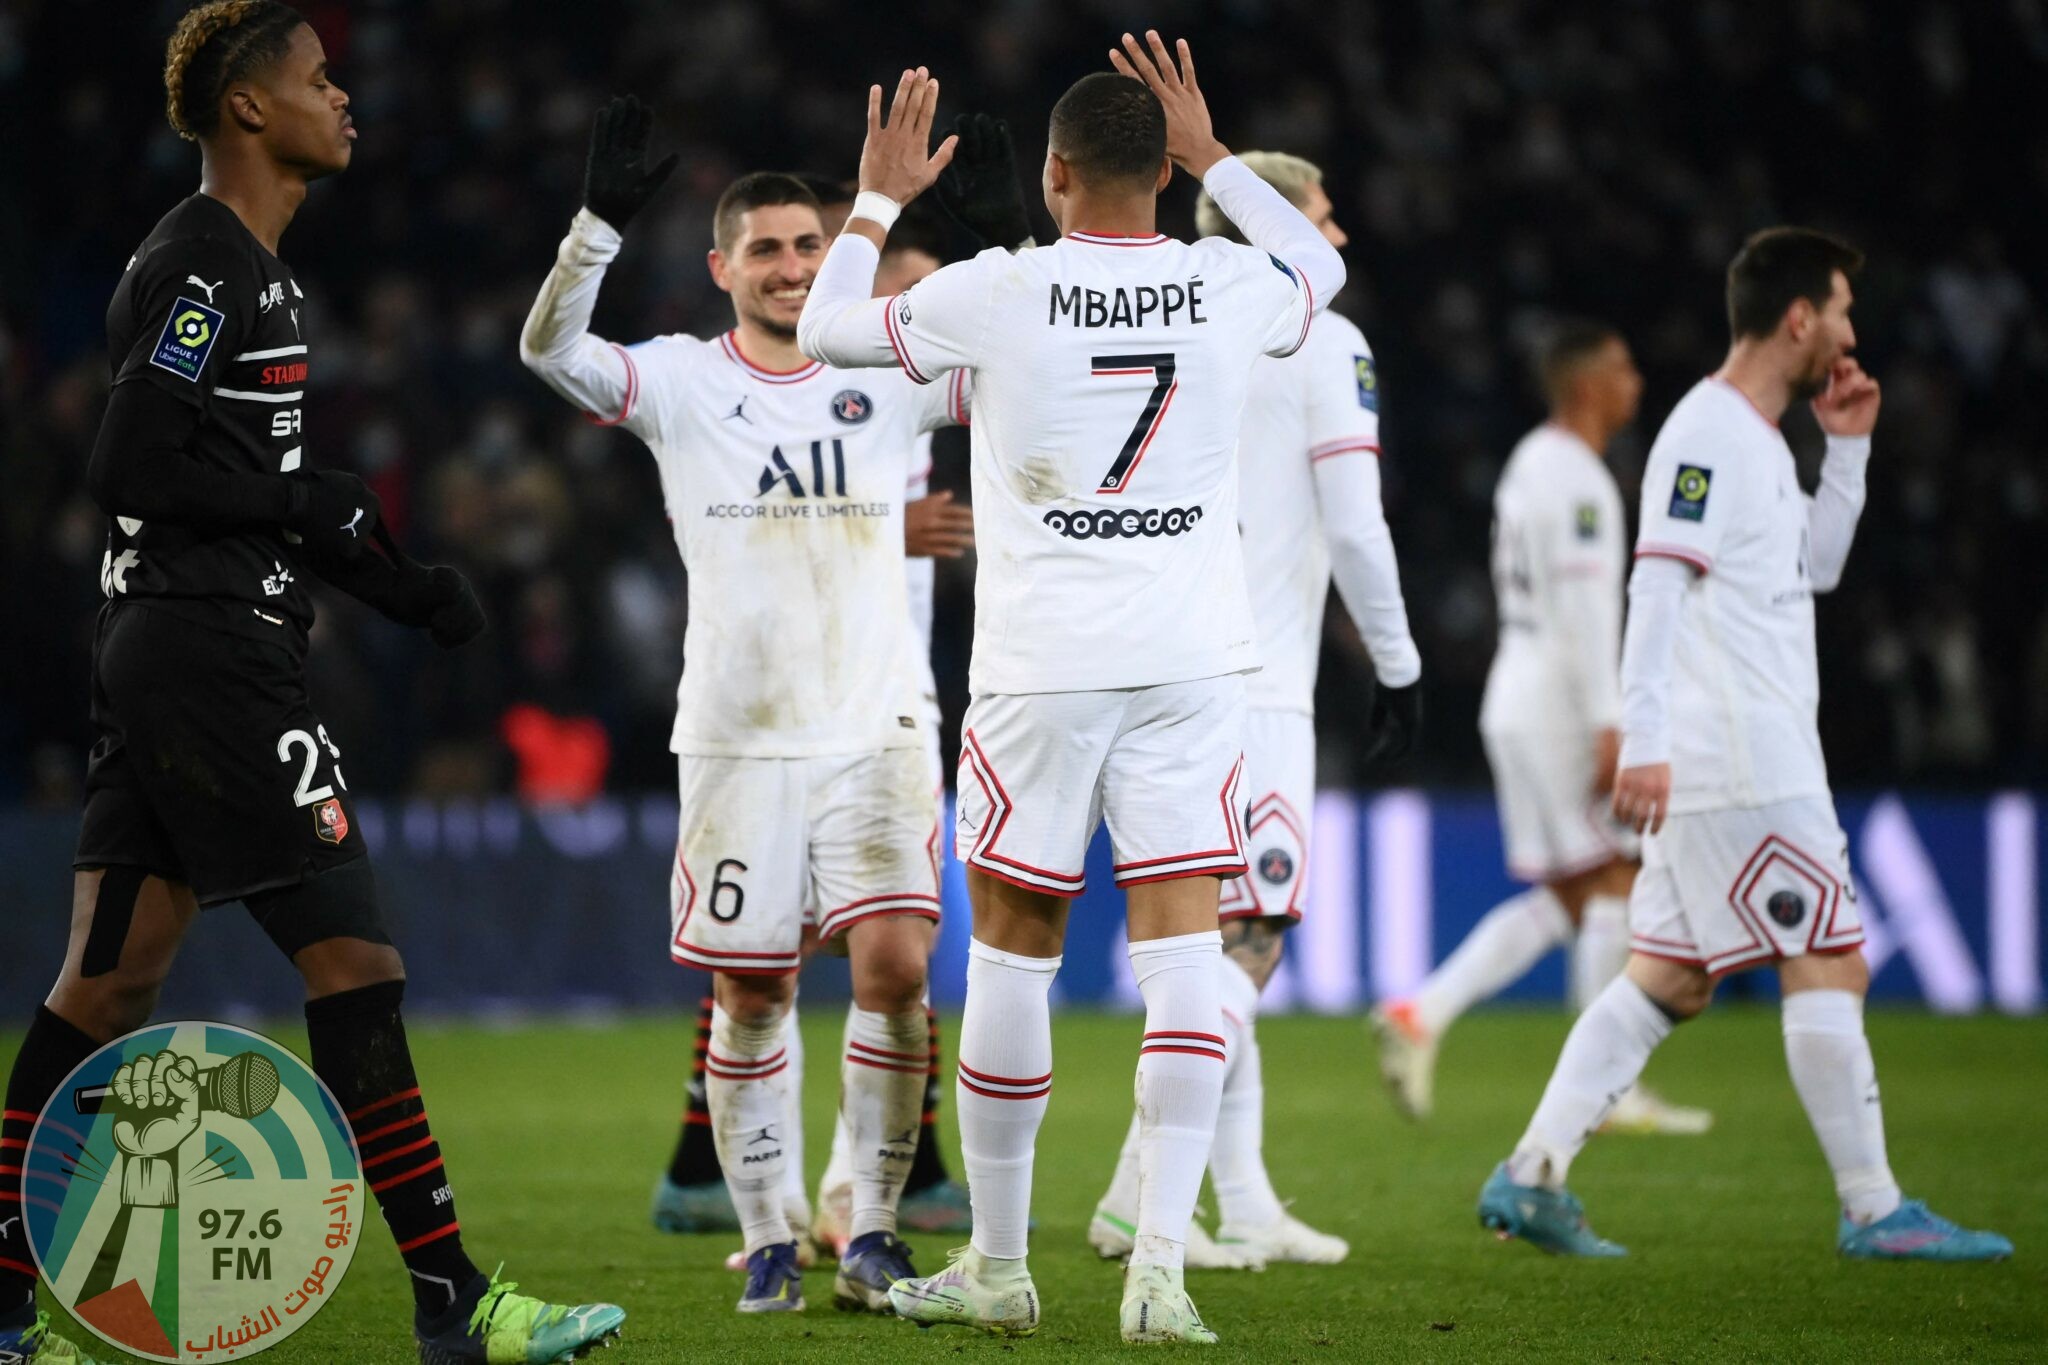 Paris Saint-Germain's French forward Kylian Mbappe celebrates with teammates after scoring during the French L1 football match between Paris-Saint Germain (PSG) and Le Stade rennais Football Club at The Parc des Princes Stadium in Paris on February 11, 2022. (Photo by FRANCK FIFE / AFP)